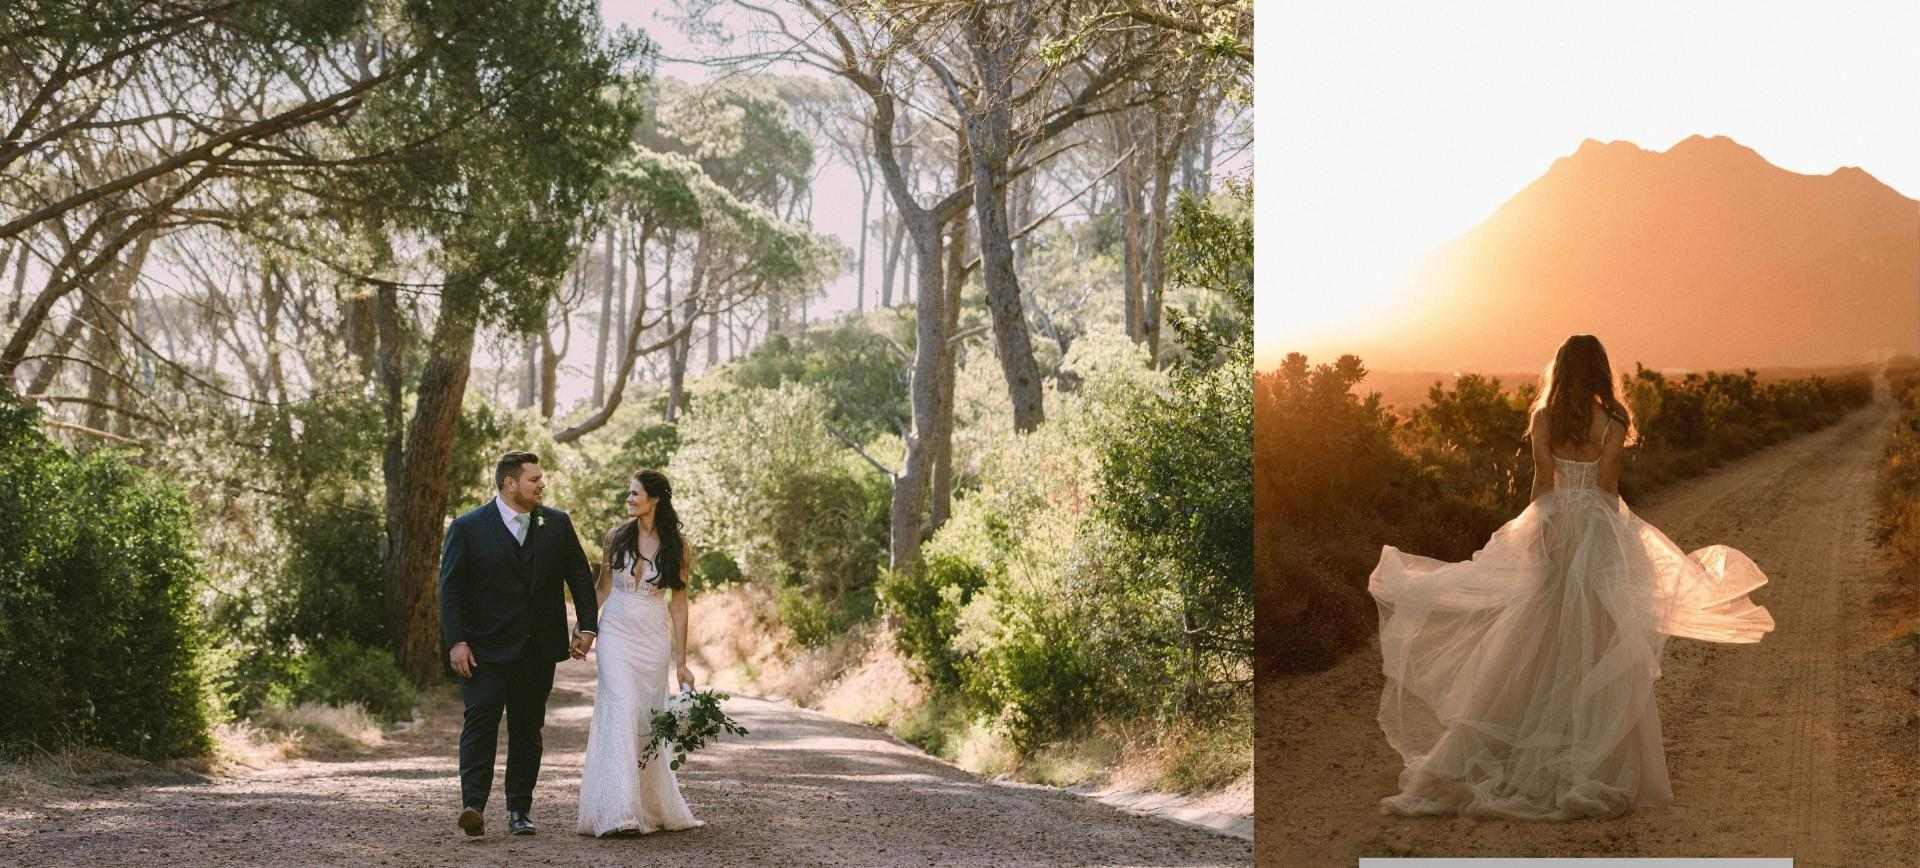 Elopement package Cape Town - South Africa